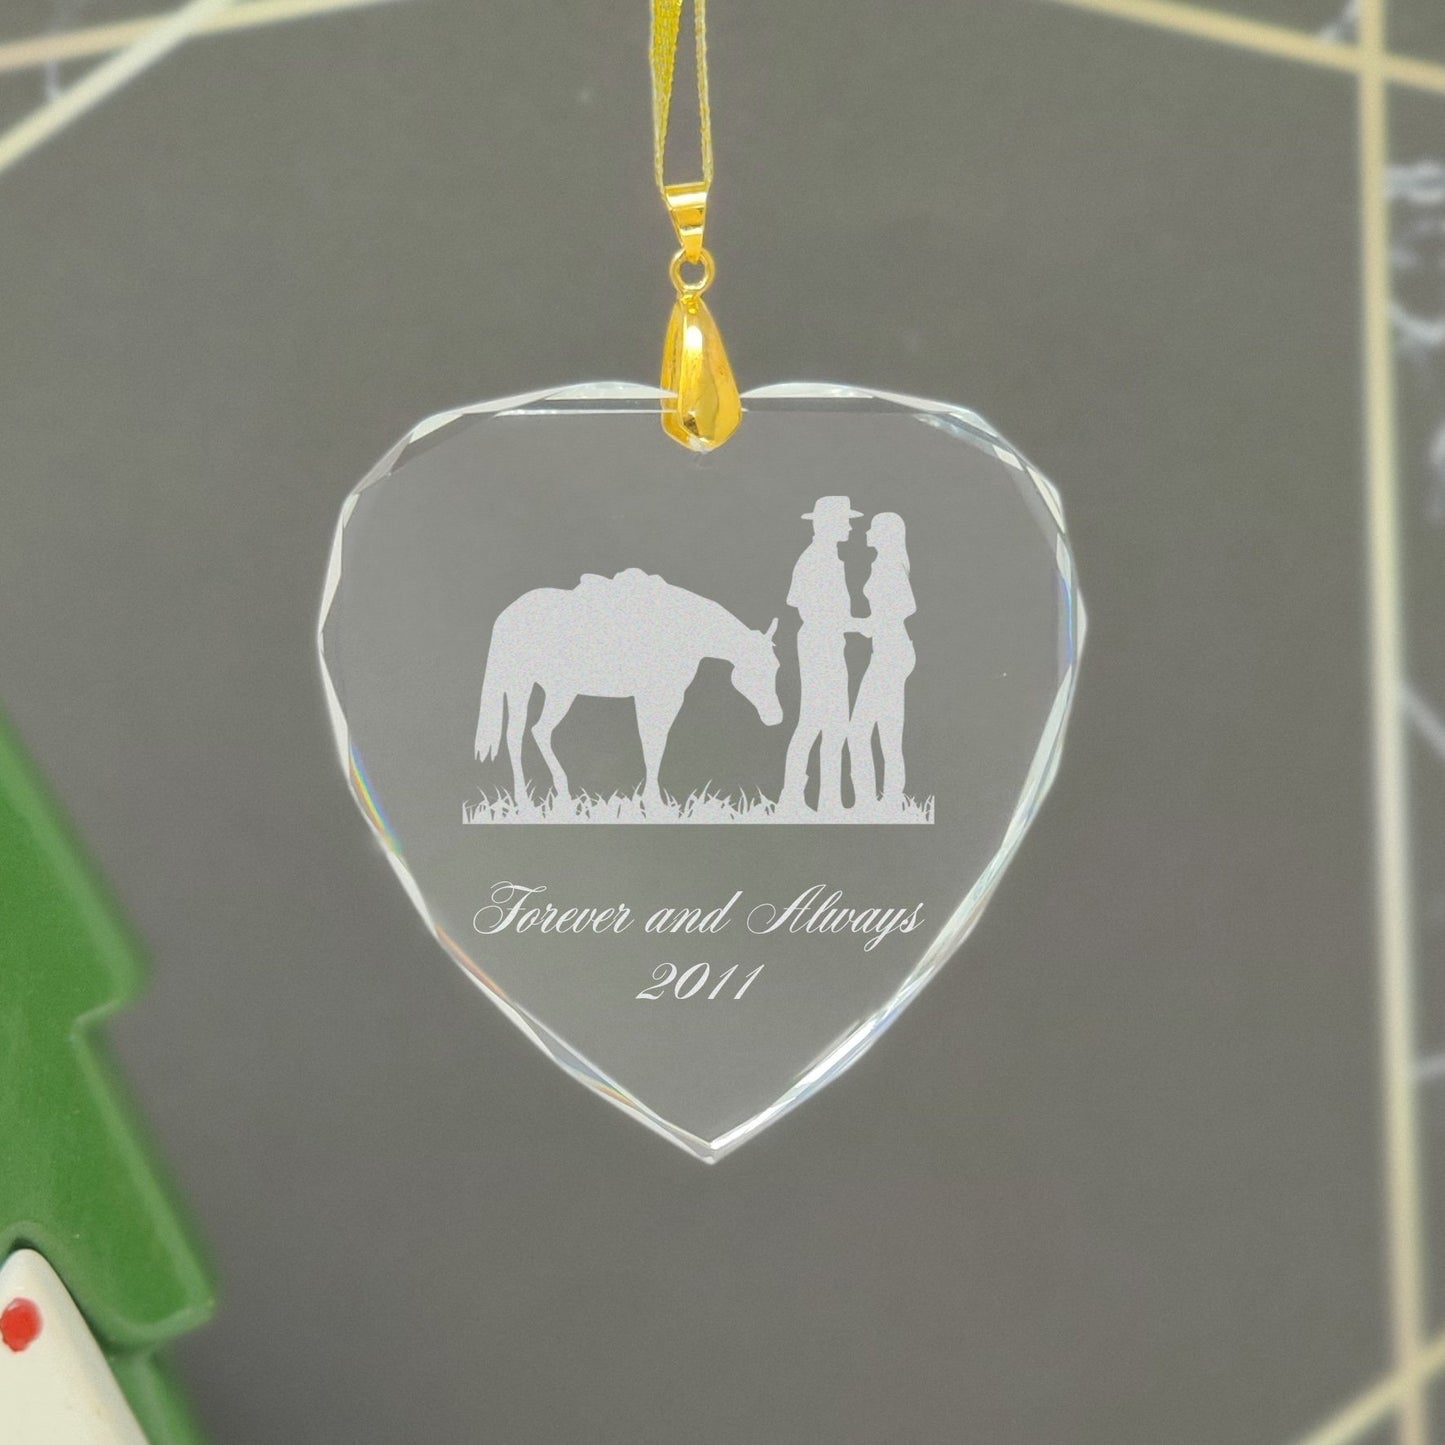 LaserGram Christmas Ornament, Electrician, Personalized Engraving Included (Heart Shape)